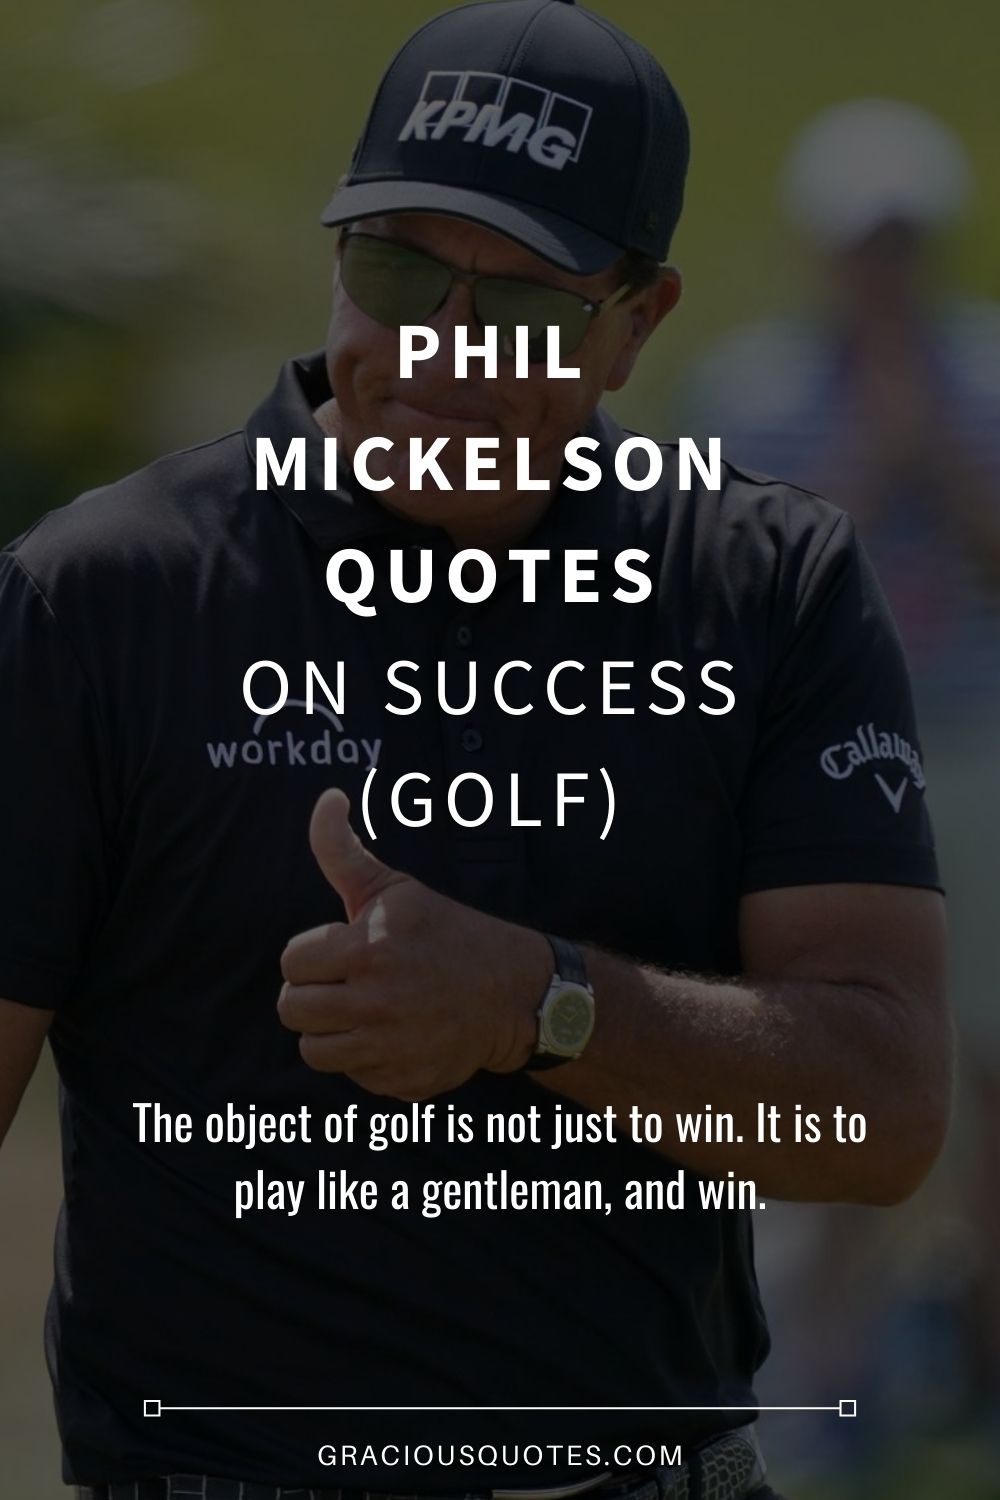 Phil Mickelson Quotes on Success (GOLF) - Gracious Quotes